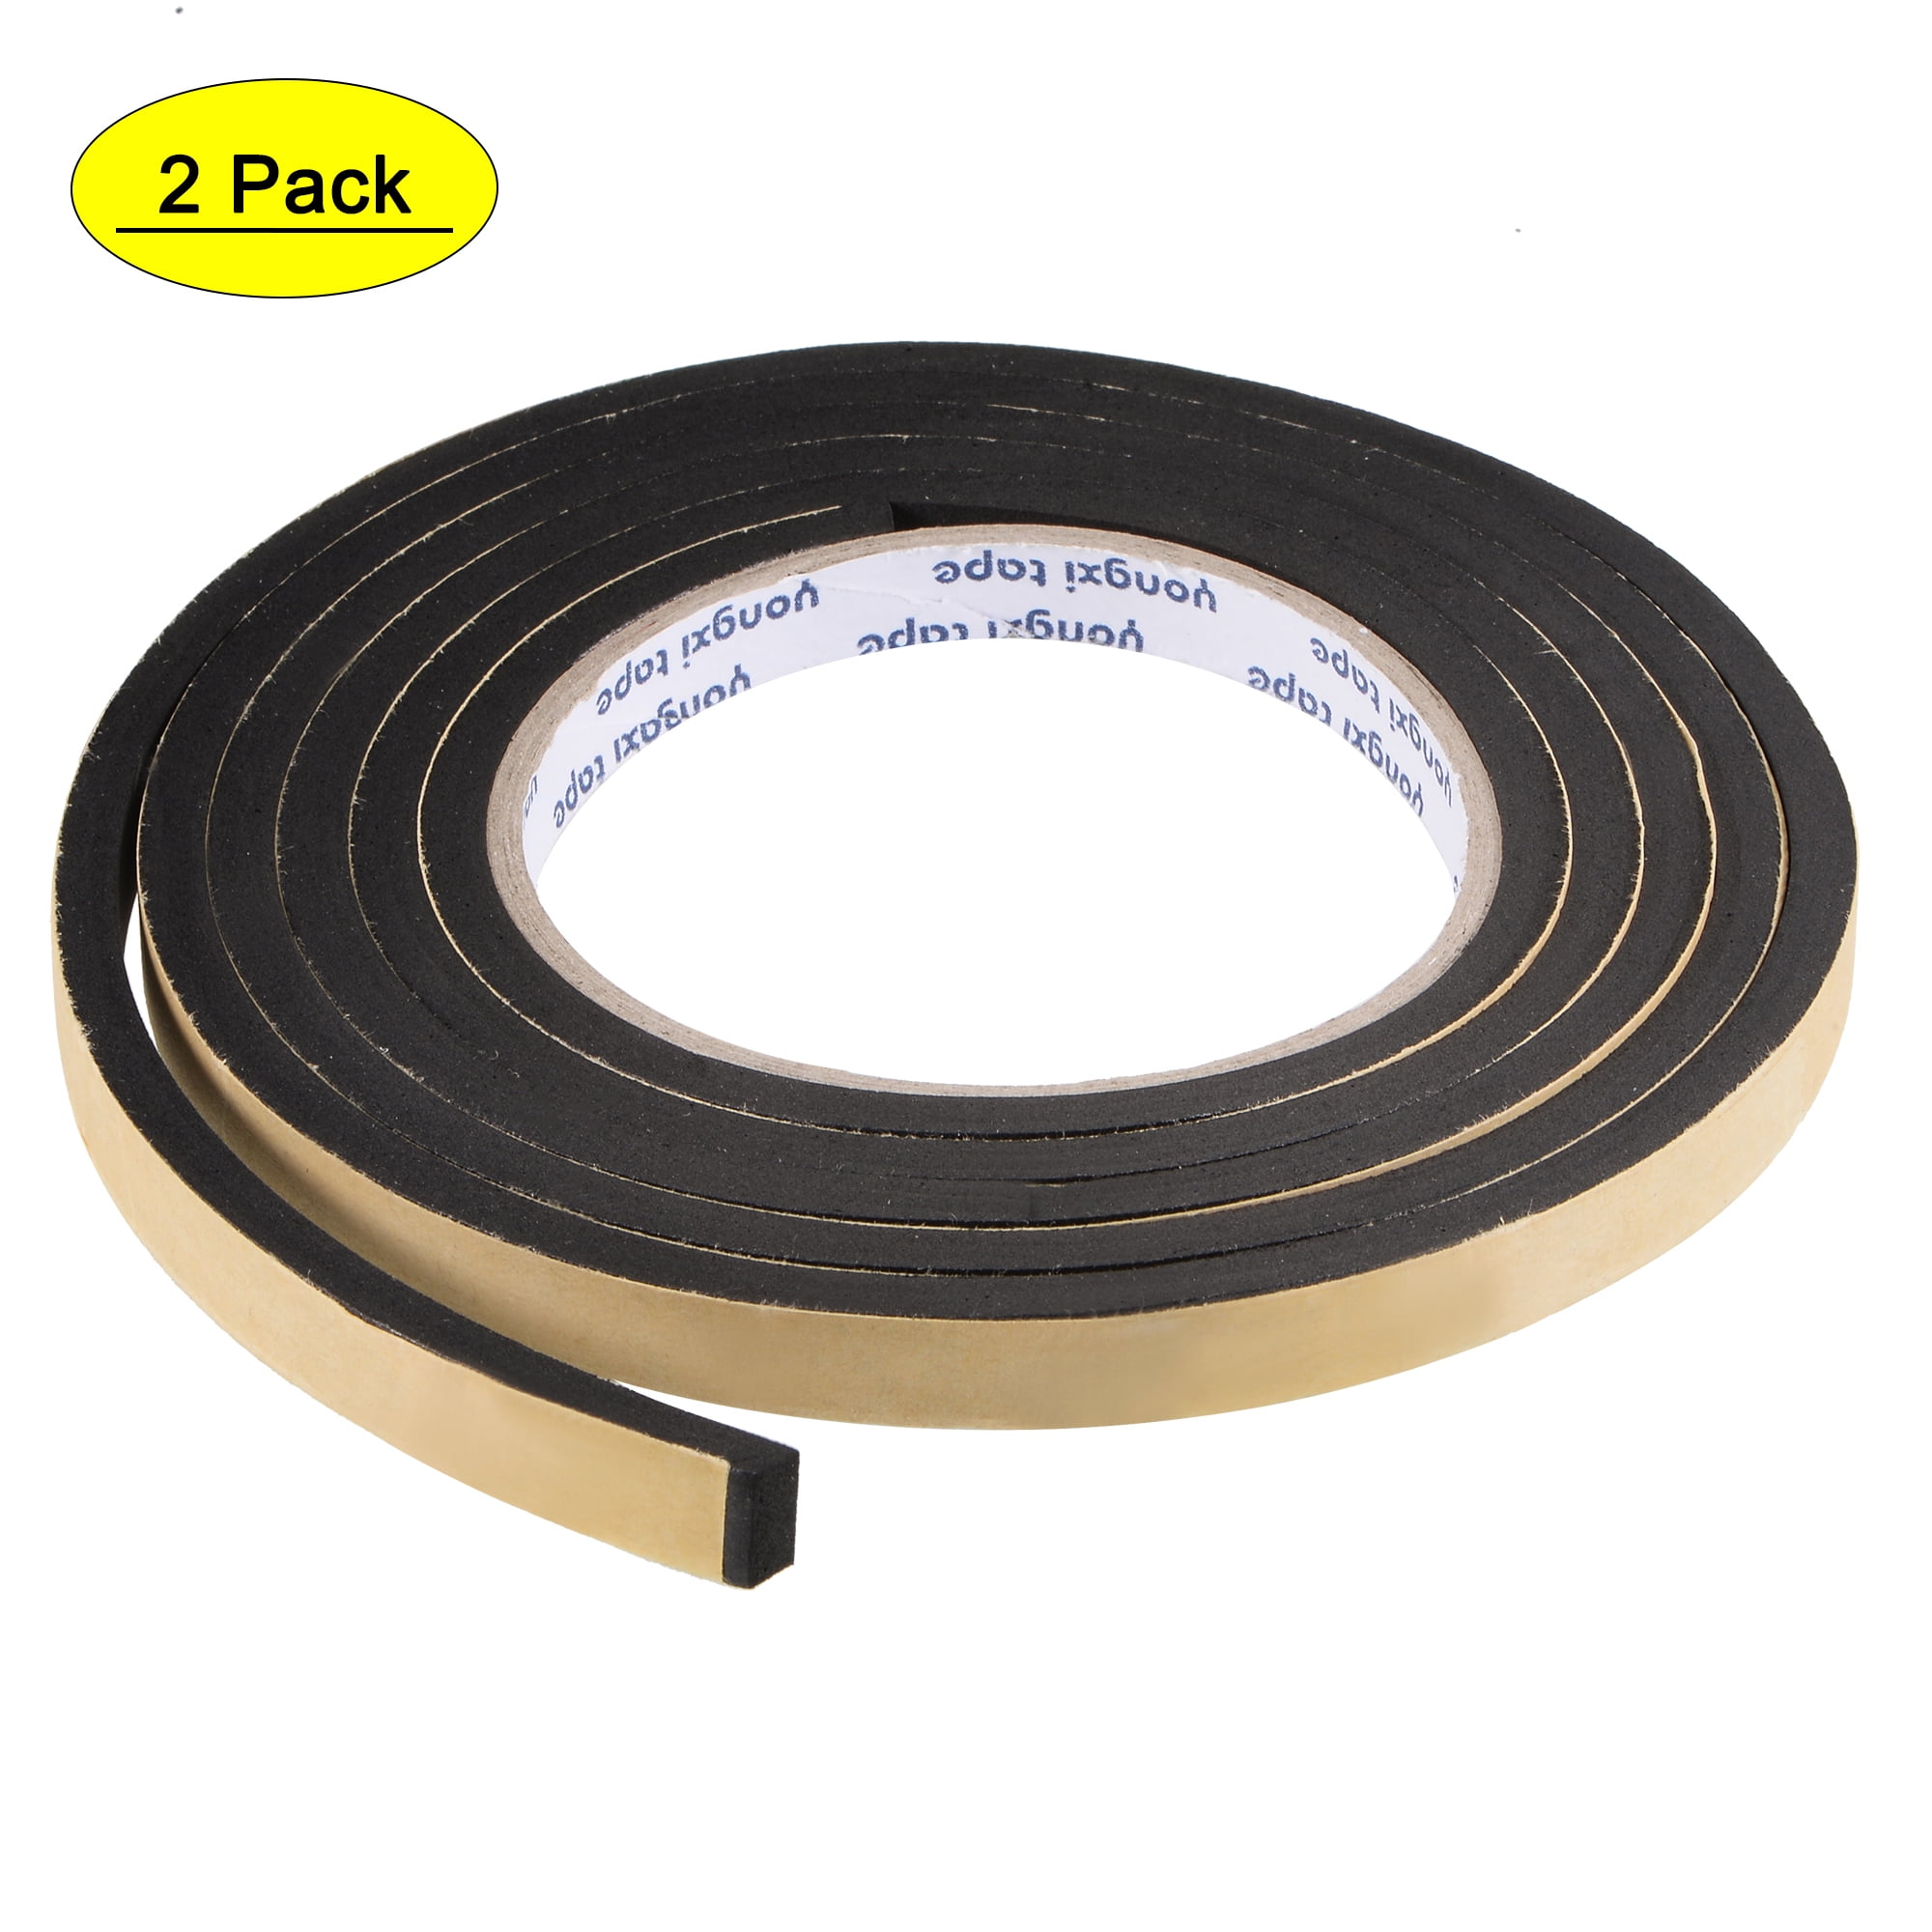 25/35/45 Mm ABCSS Self-Adhesive Sealing Strips,soundproof Silicone Door Bottom Sealing Strips,Door and Window Sealing Strips,Door Cracks and Dustproof